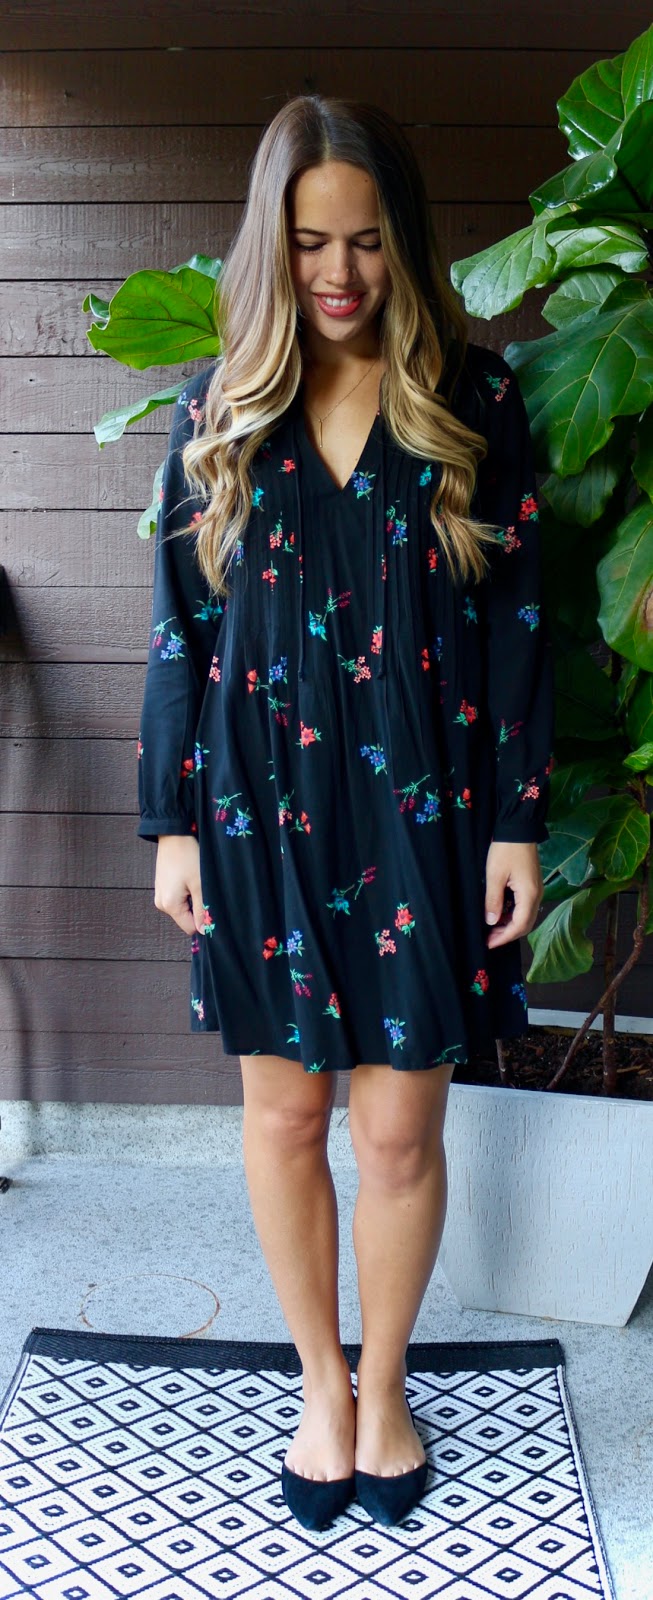 Jules in Flats - Old Navy Floral Swing Dress (Business Casual Fall Workwear on a Budget) 